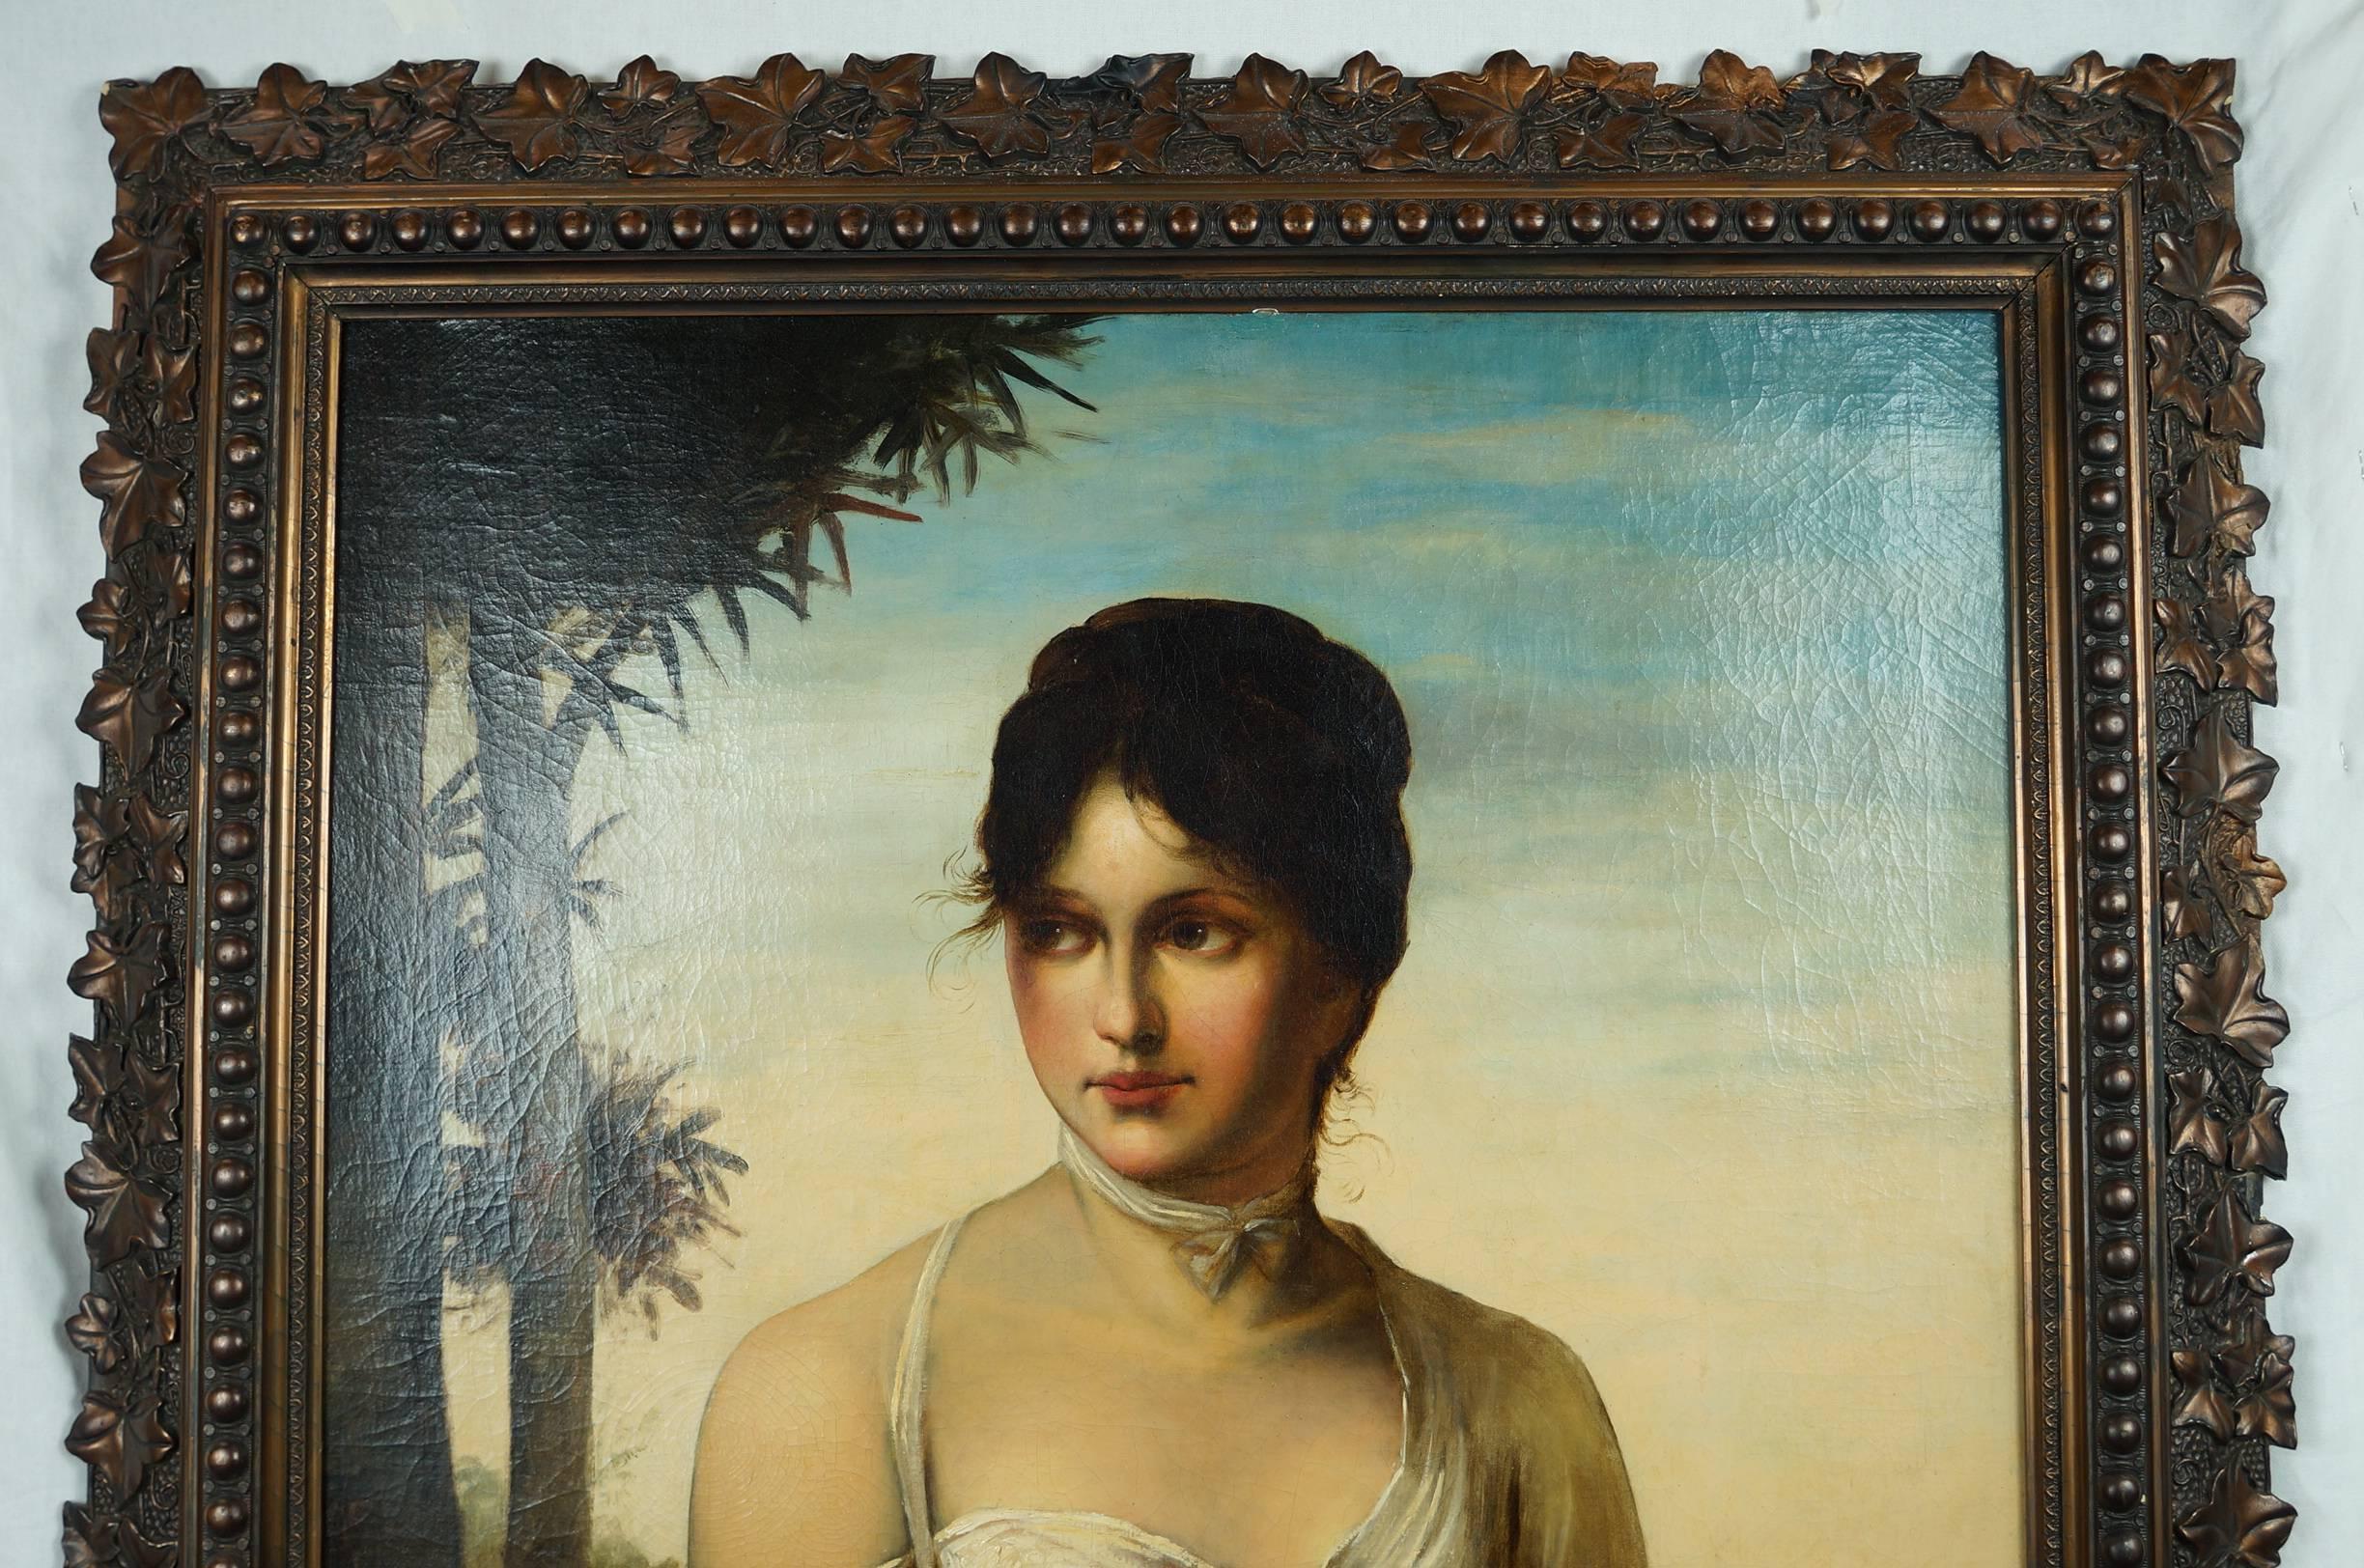 Neoclassical oil on canvas painting of standing lady holding mandolin.
Signed: Not legible.
Very fine detailed painting.
Measures: Height 49”, width 35” depth 3” frame
Height 40.5” width 26” painting without frame
Oil on canvas.
Stock Number: